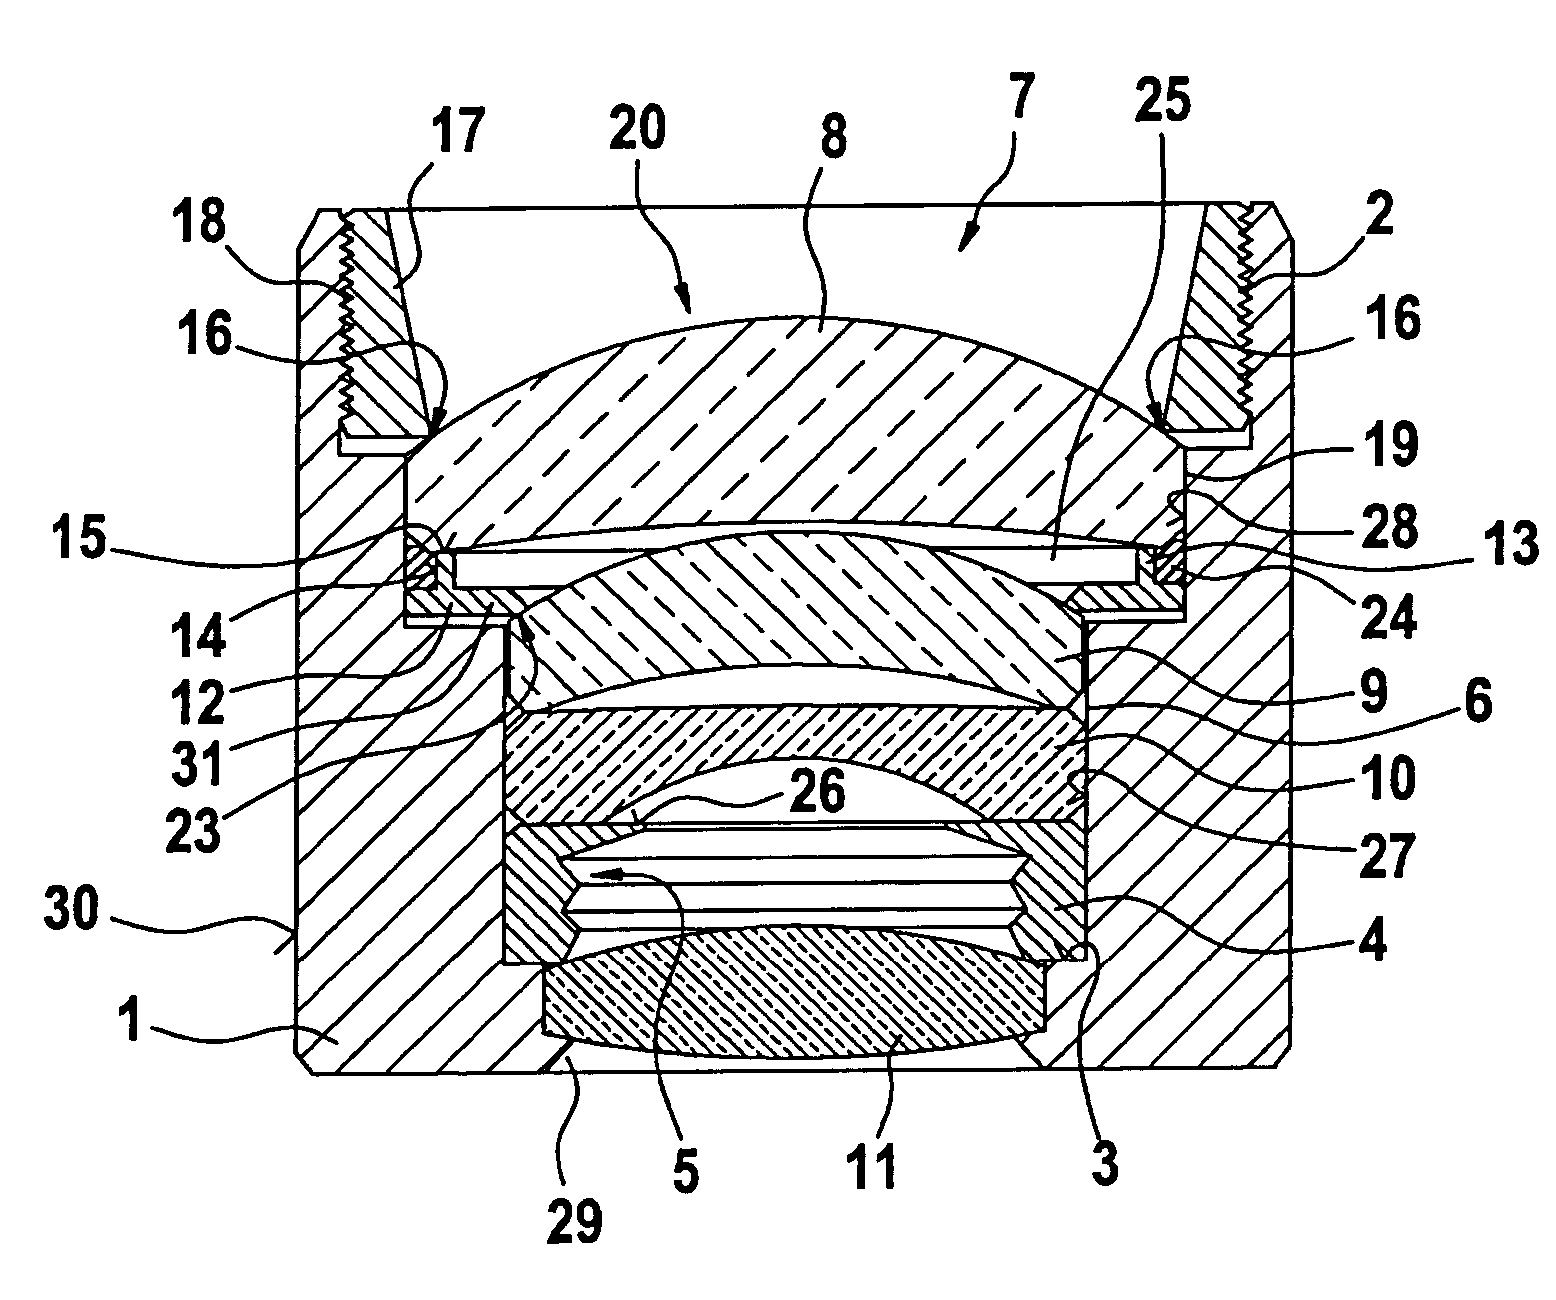 Compound lens having a sealing configuration suitable for motor vehicles